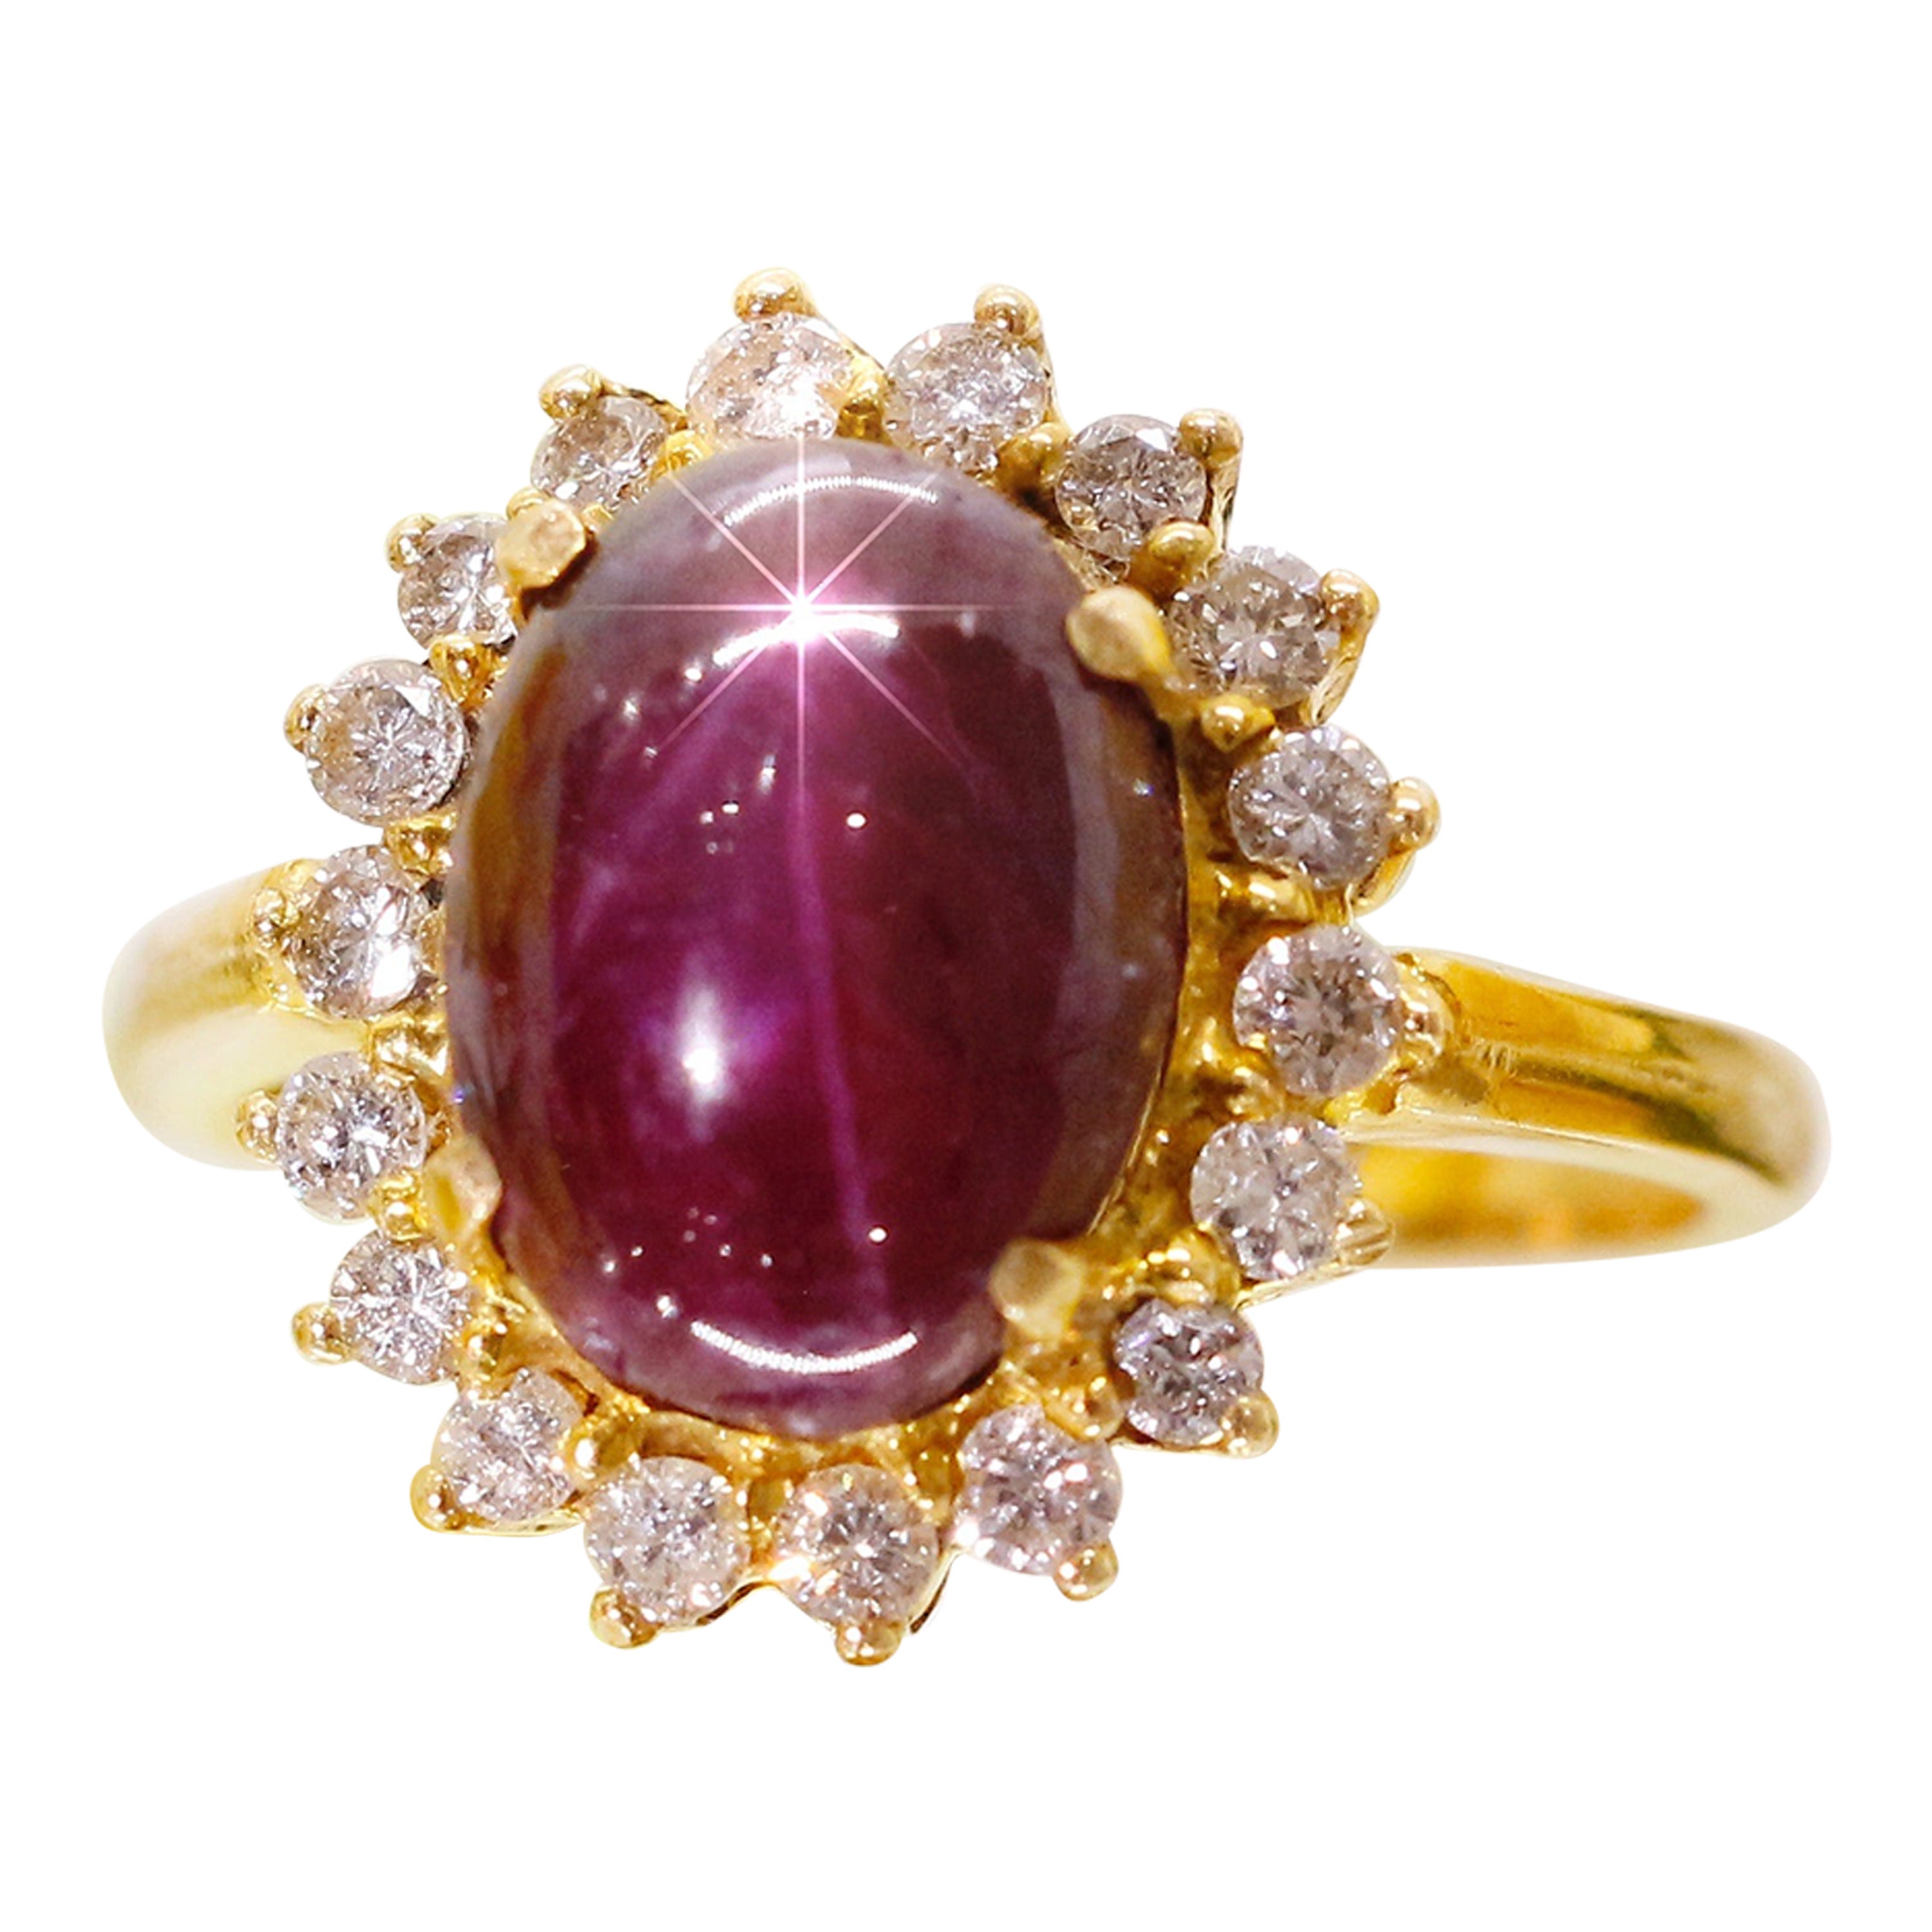 Genuine 5 Carat Ruby Cabochon Solitaire Ring For Sale